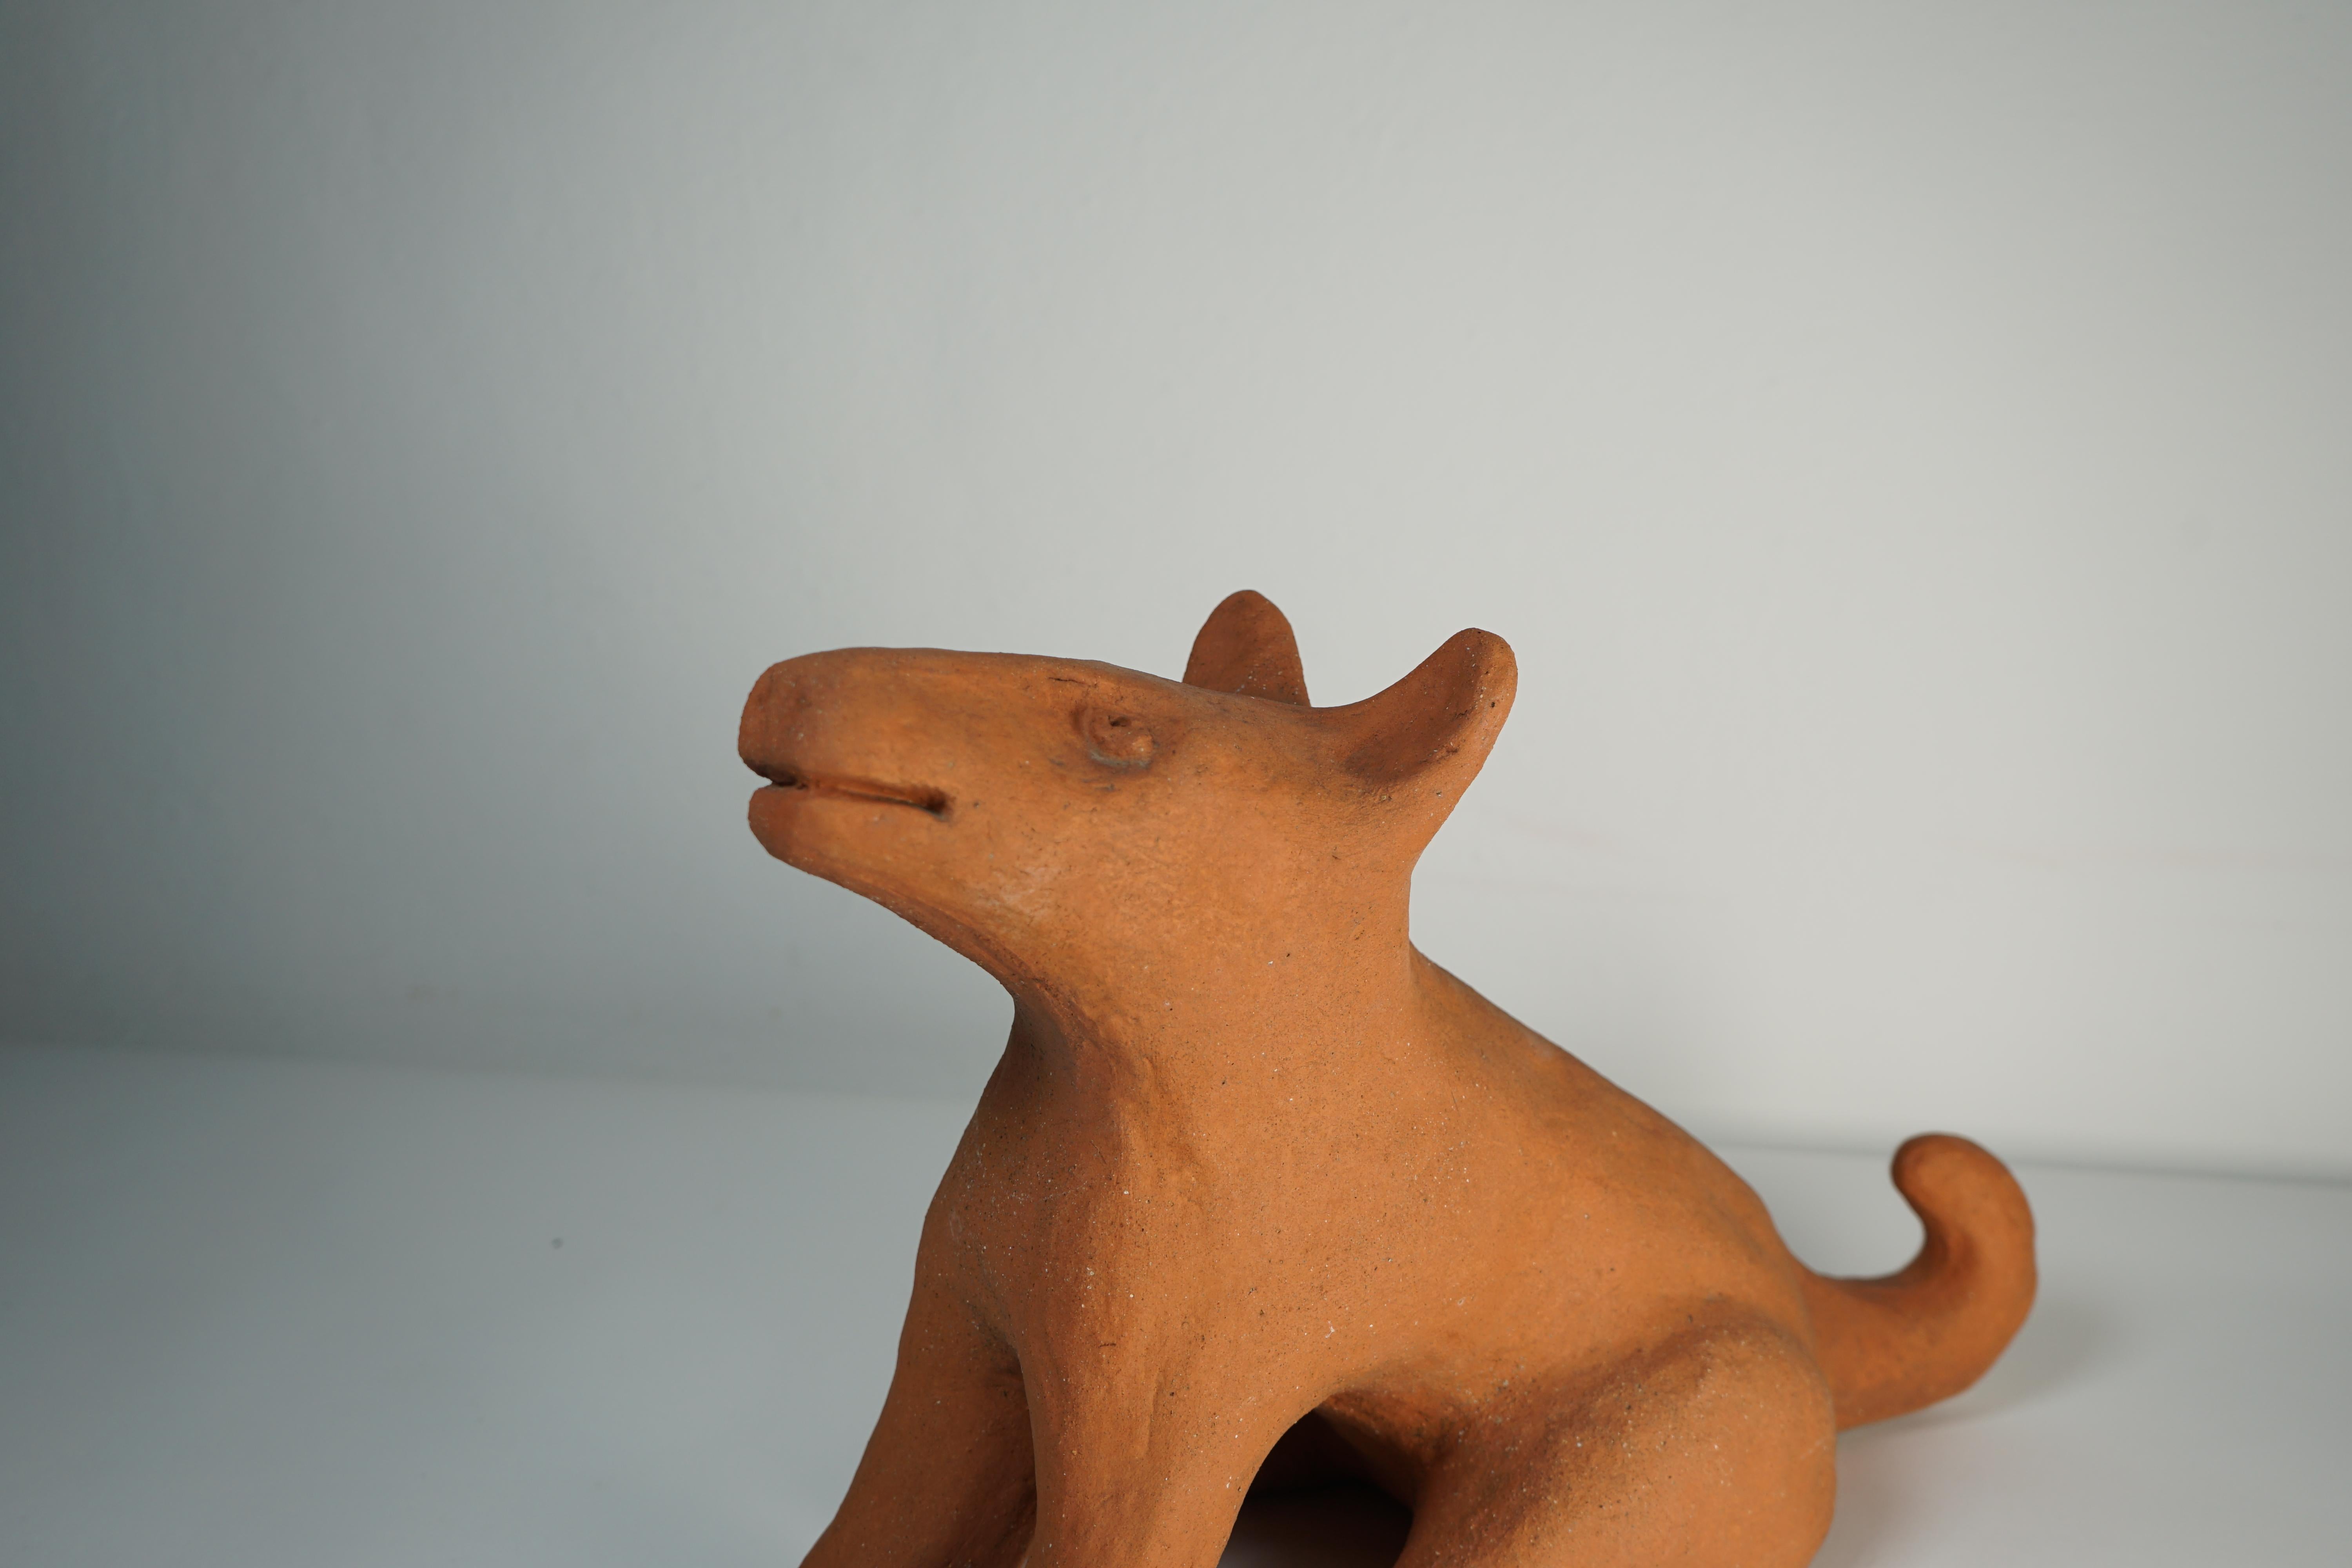 Ceramic sculpture Wolf model designed by Nathalie Du Pasquier and produced by Alessio Sarri in 1993. Engraved in the pottery, signature of the artist and manufacturer .
The fox is part of a series of sculptures made up of 7 different